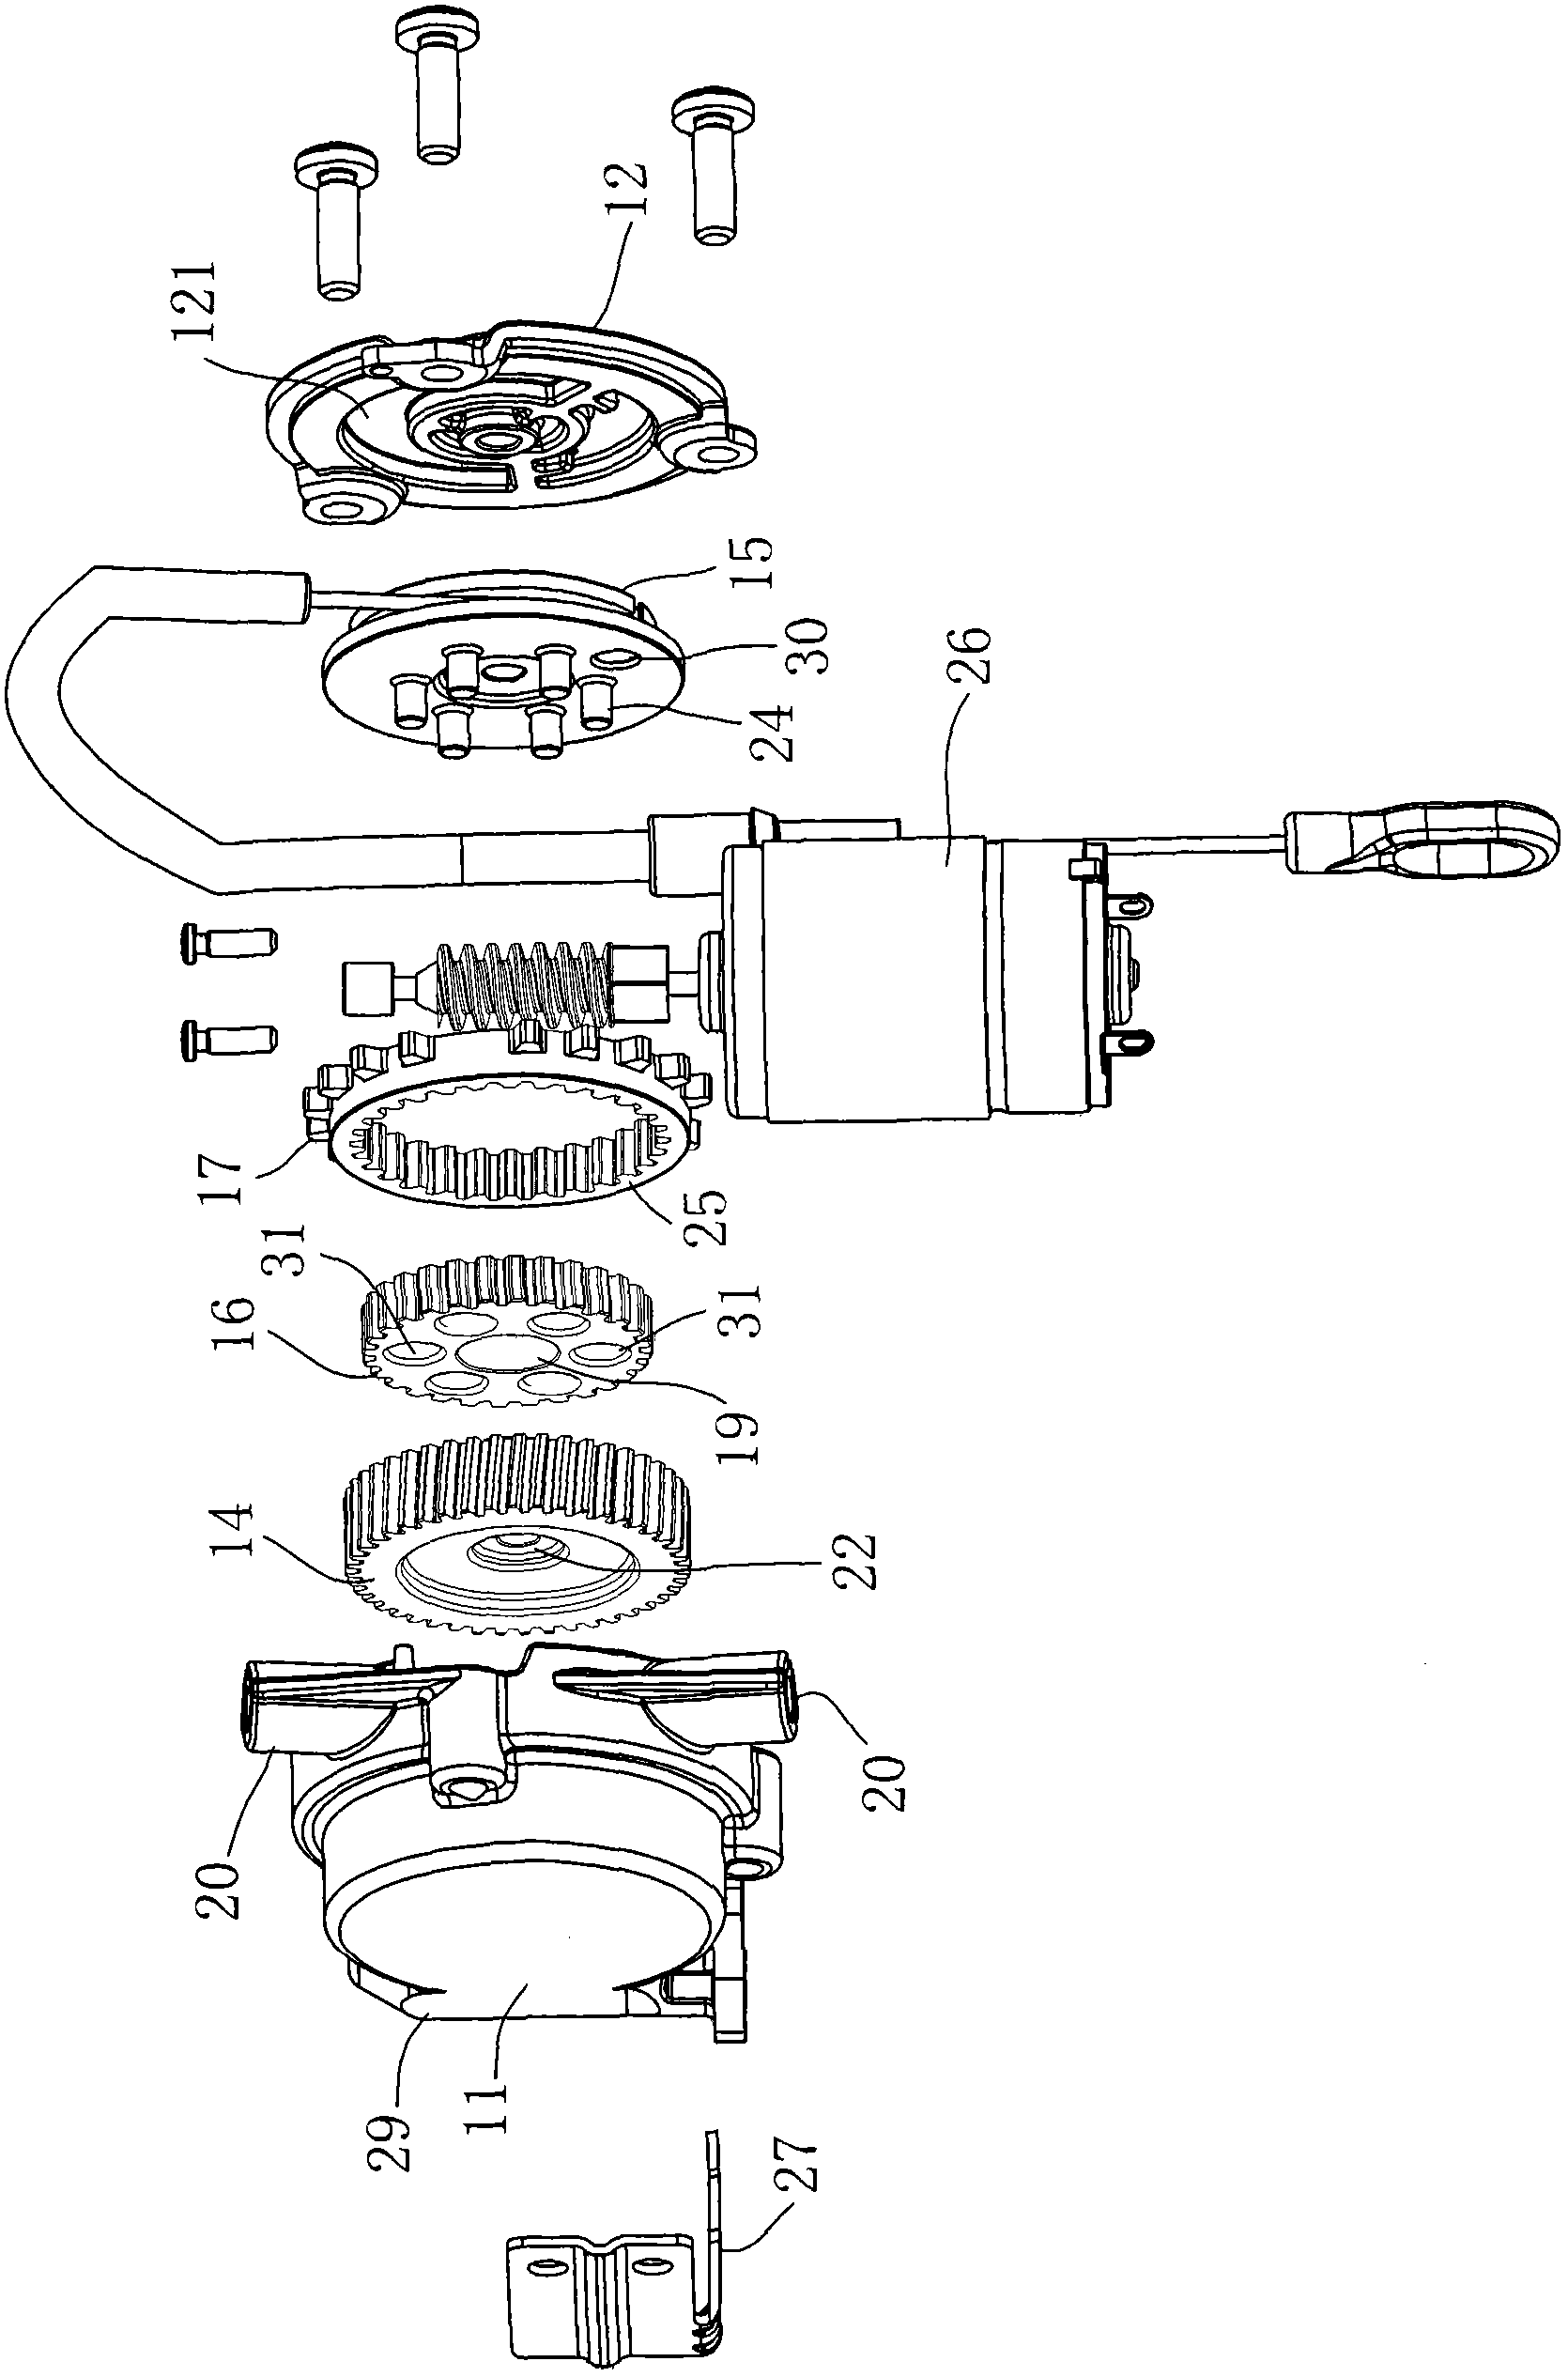 Driving device for electric lumbar system